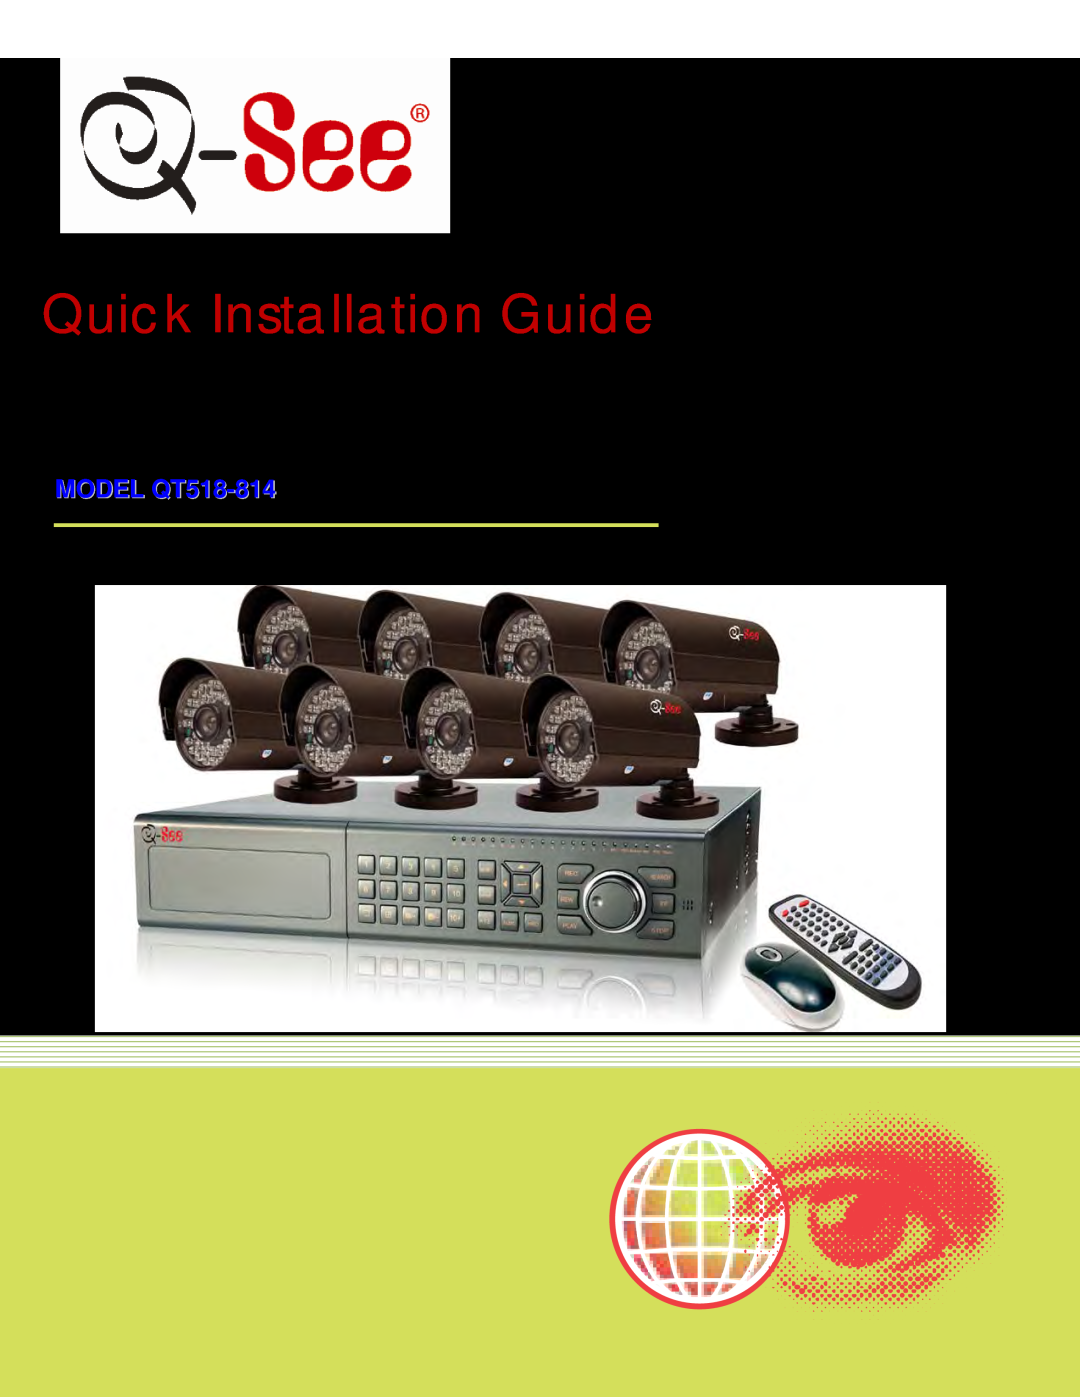 Q-See QT518-814 manual Channel H.264 Compression DVR with D1 Real-Time Recording and, Quick Installation Guide 